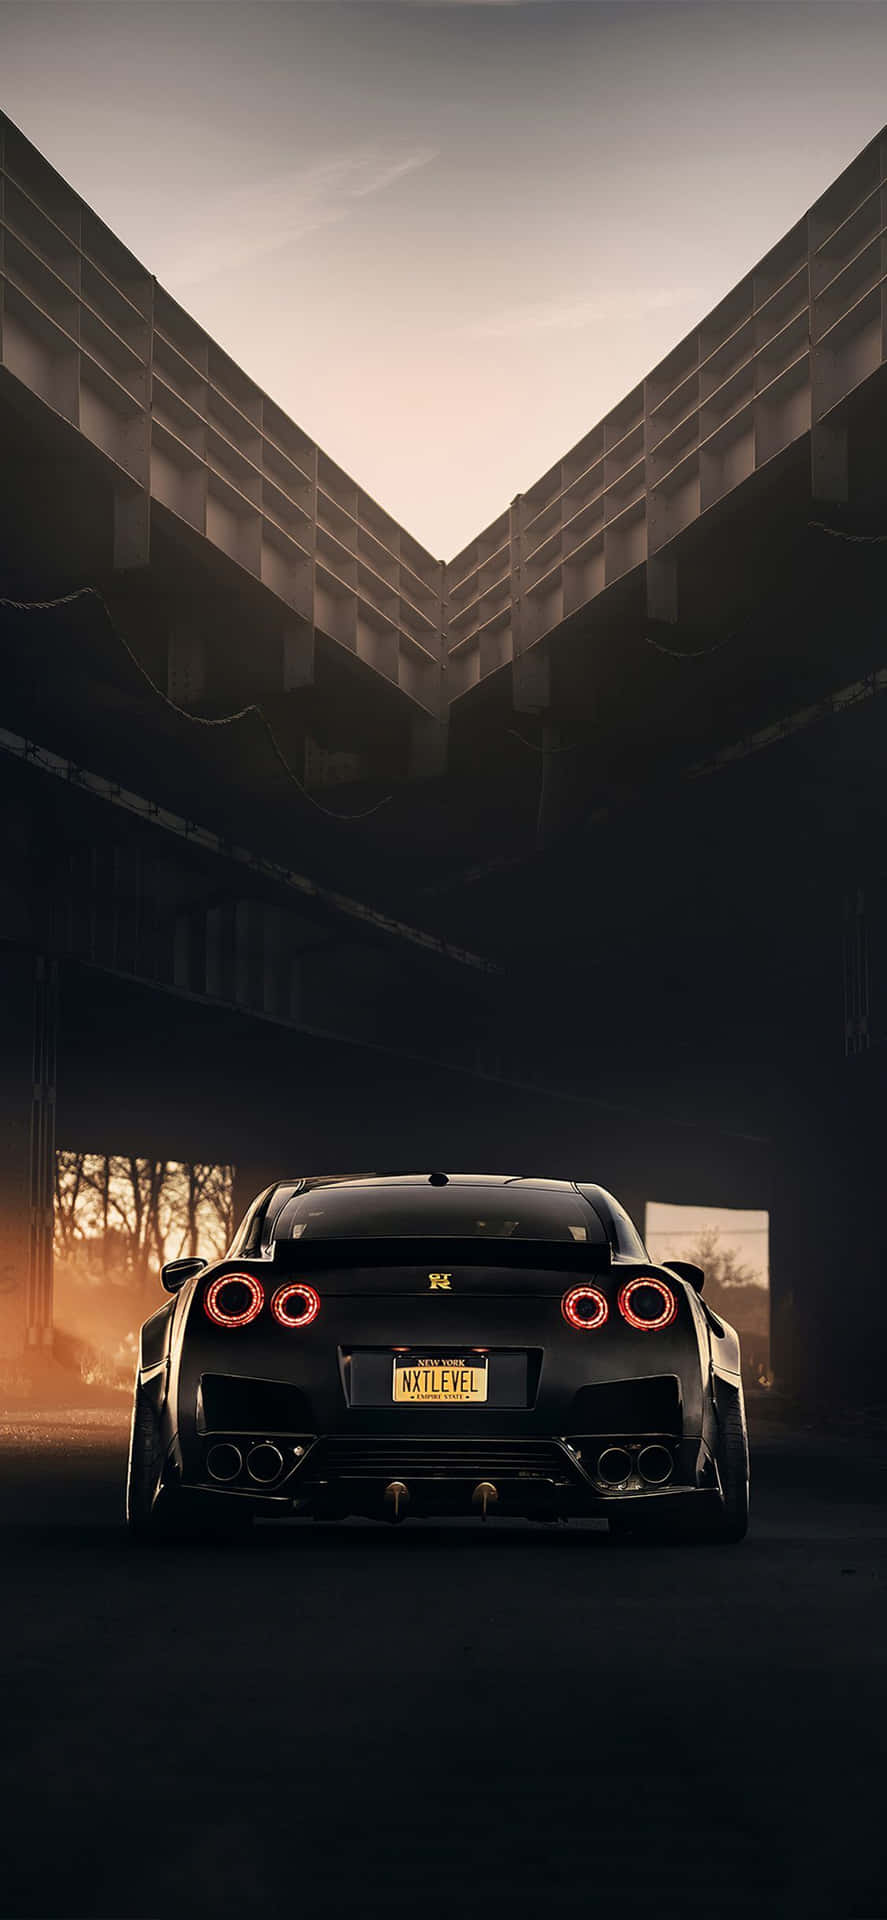 The sleek design of Nissan Skyline for your Iphone Wallpaper